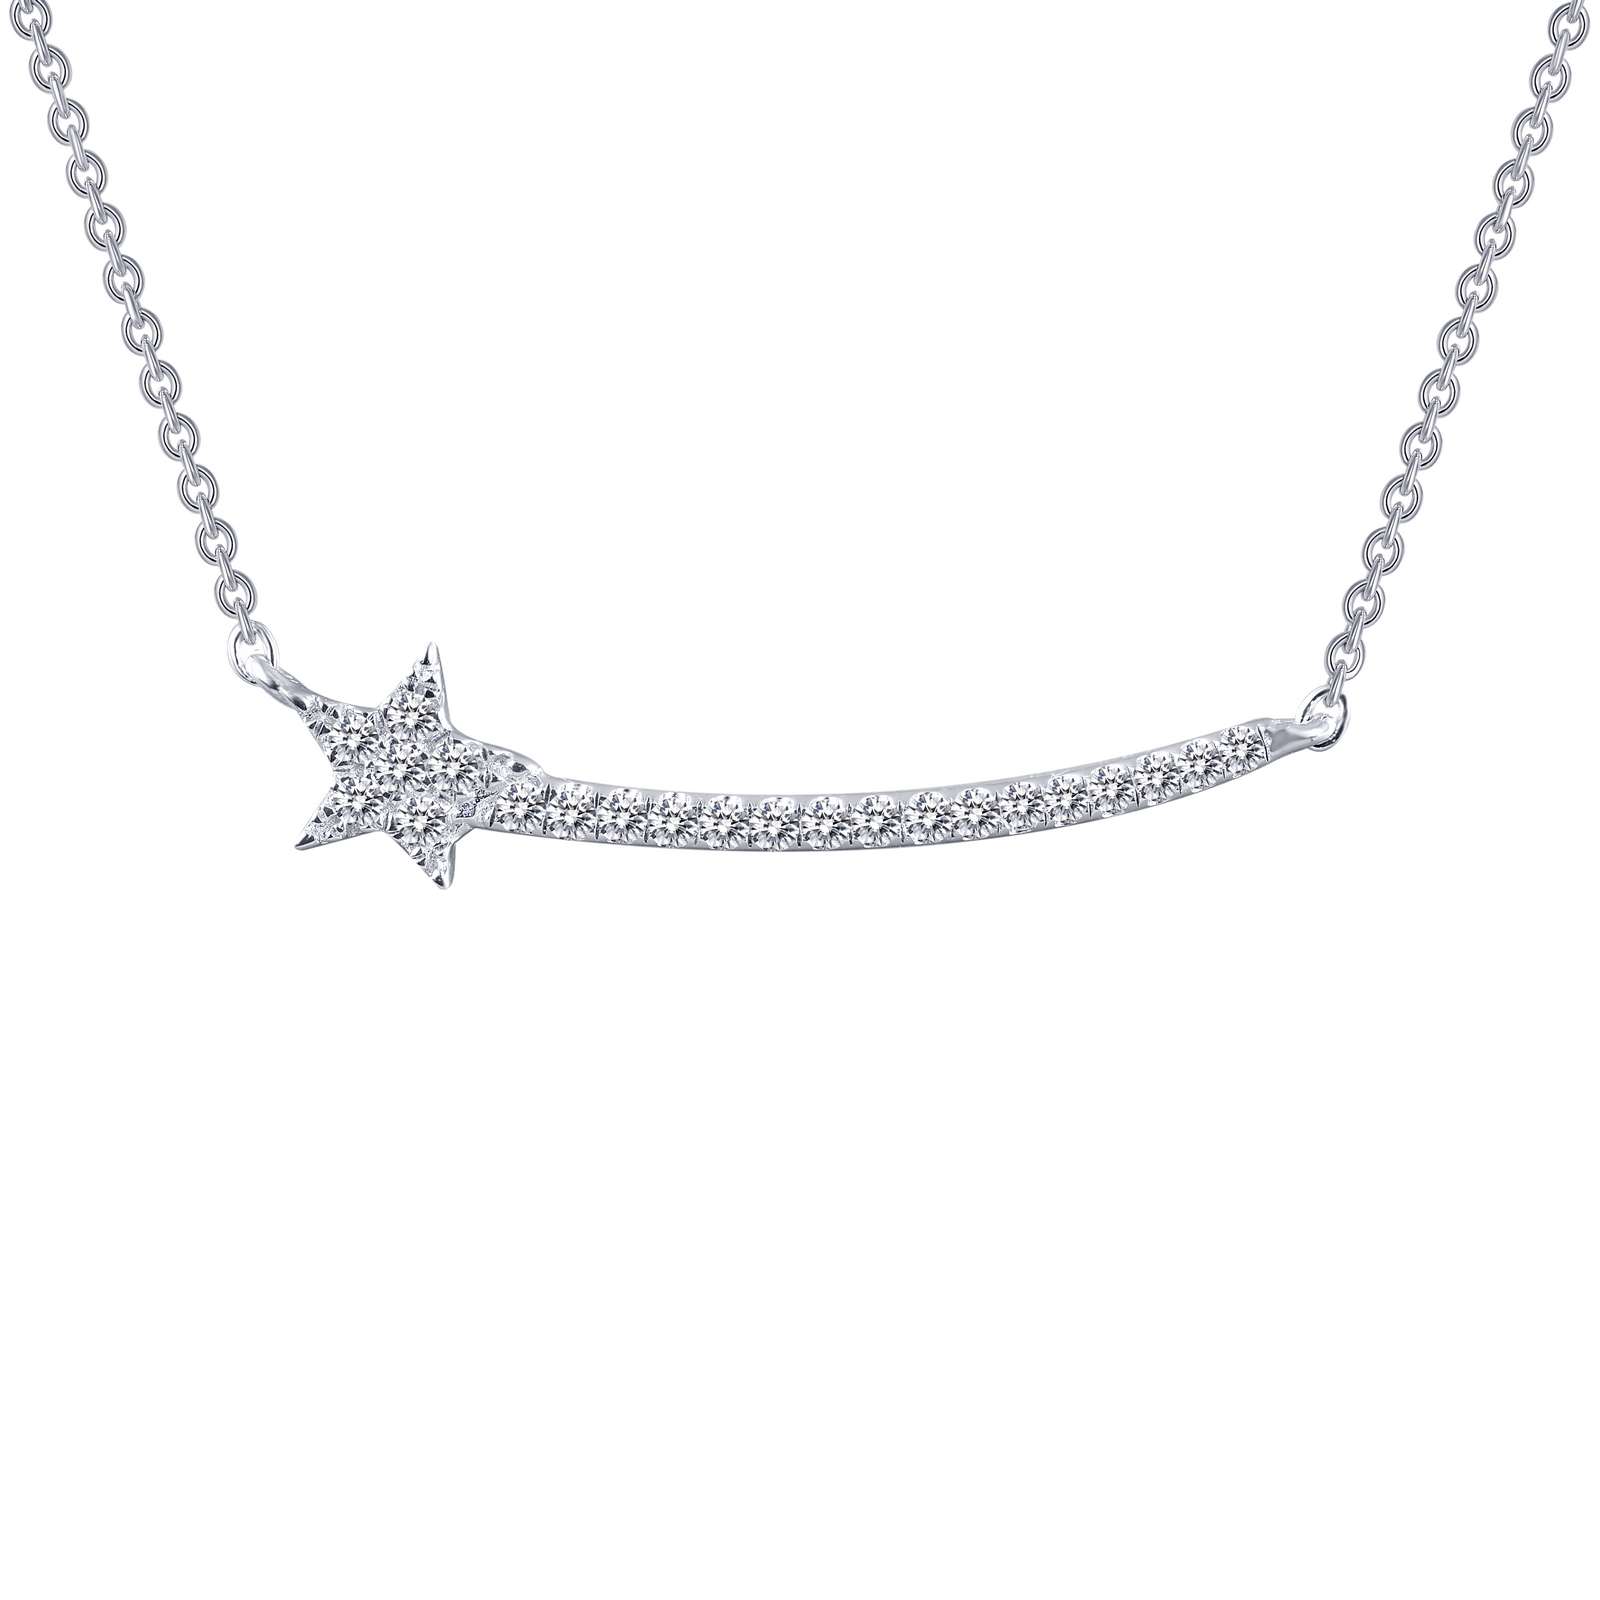 Shooting Star Necklace Griner Jewelry Co. Moultrie, GA